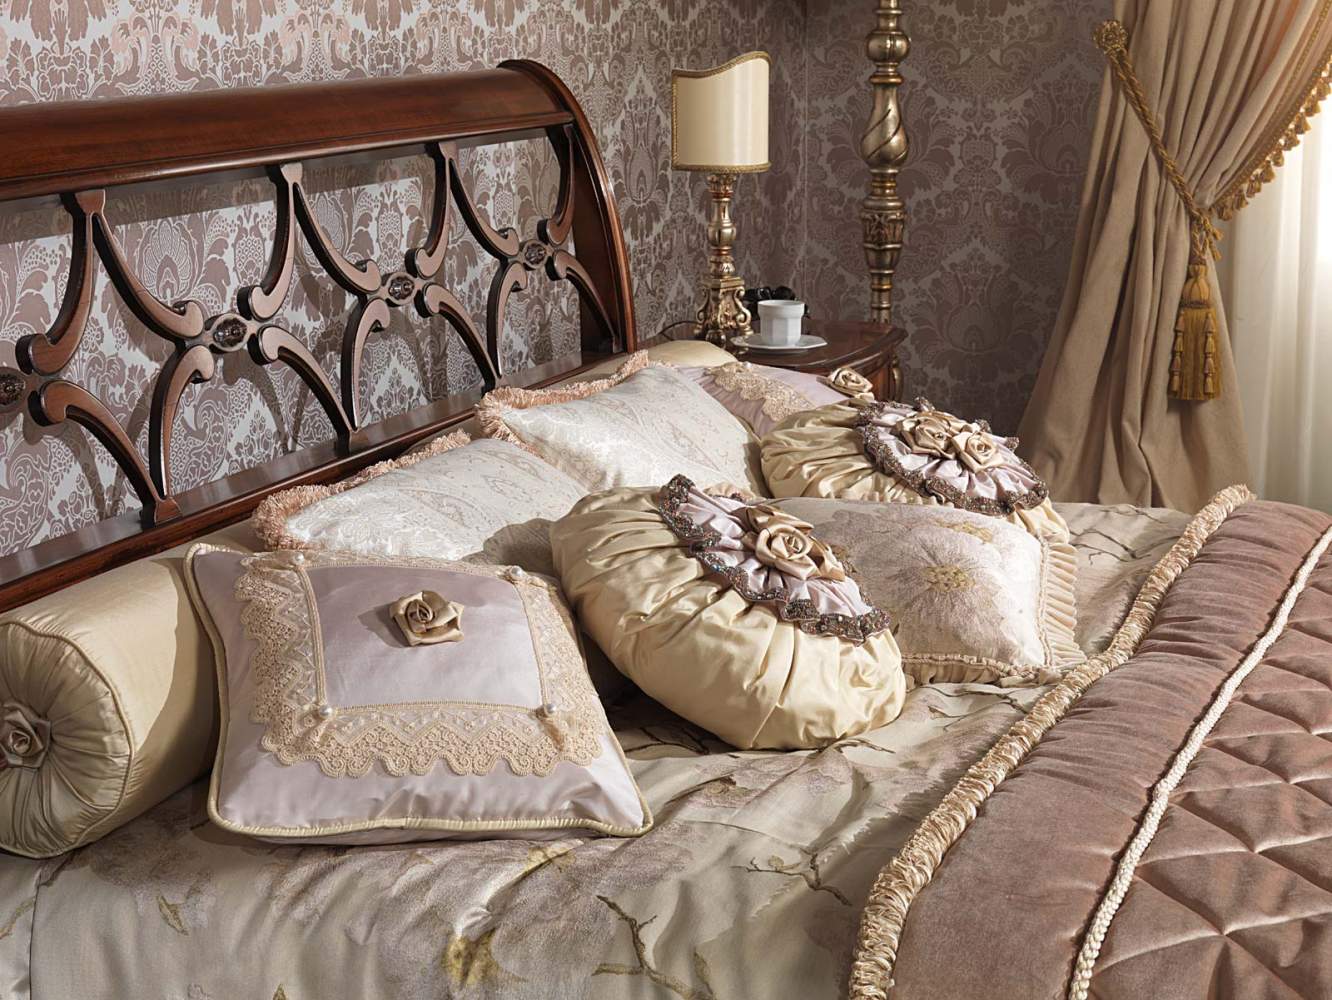 Bed with perforated headboard 18th century italian